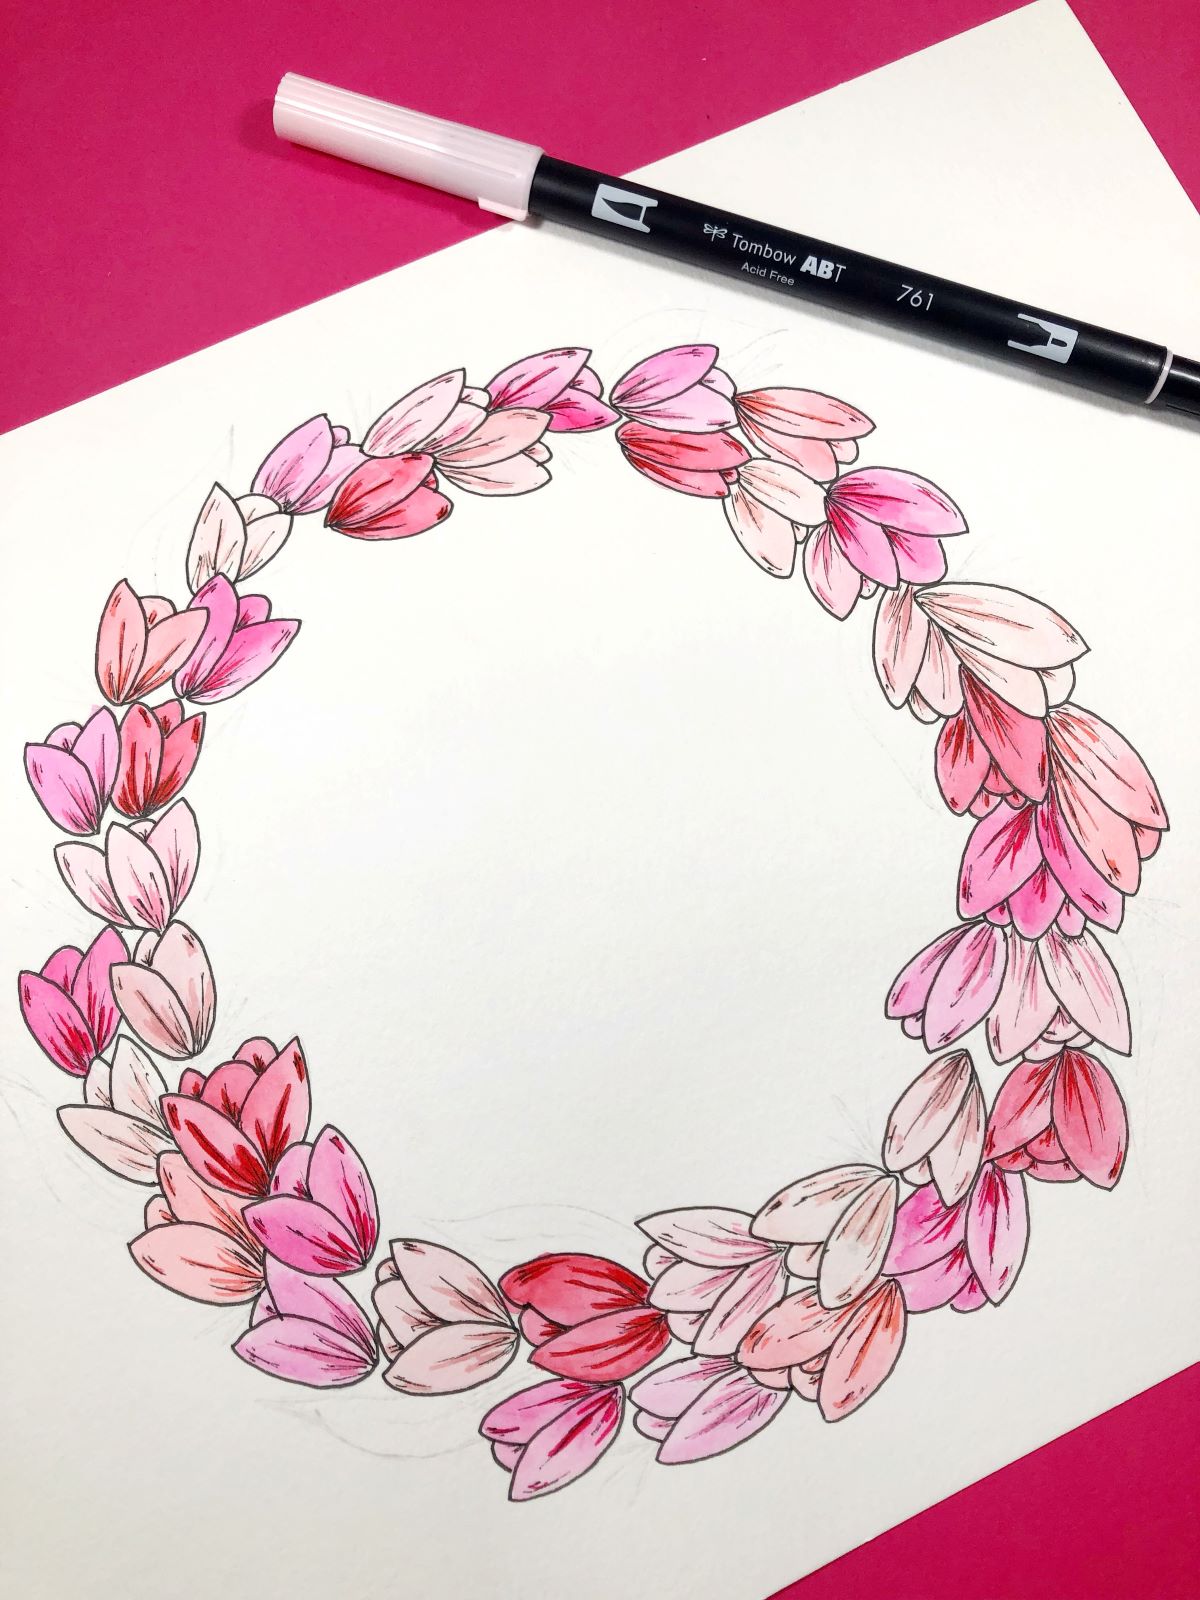 Watercolor Wreath using @tombowusa Dual Brush Pens. Learn from @aheartenedcalling #tombow #watercolor